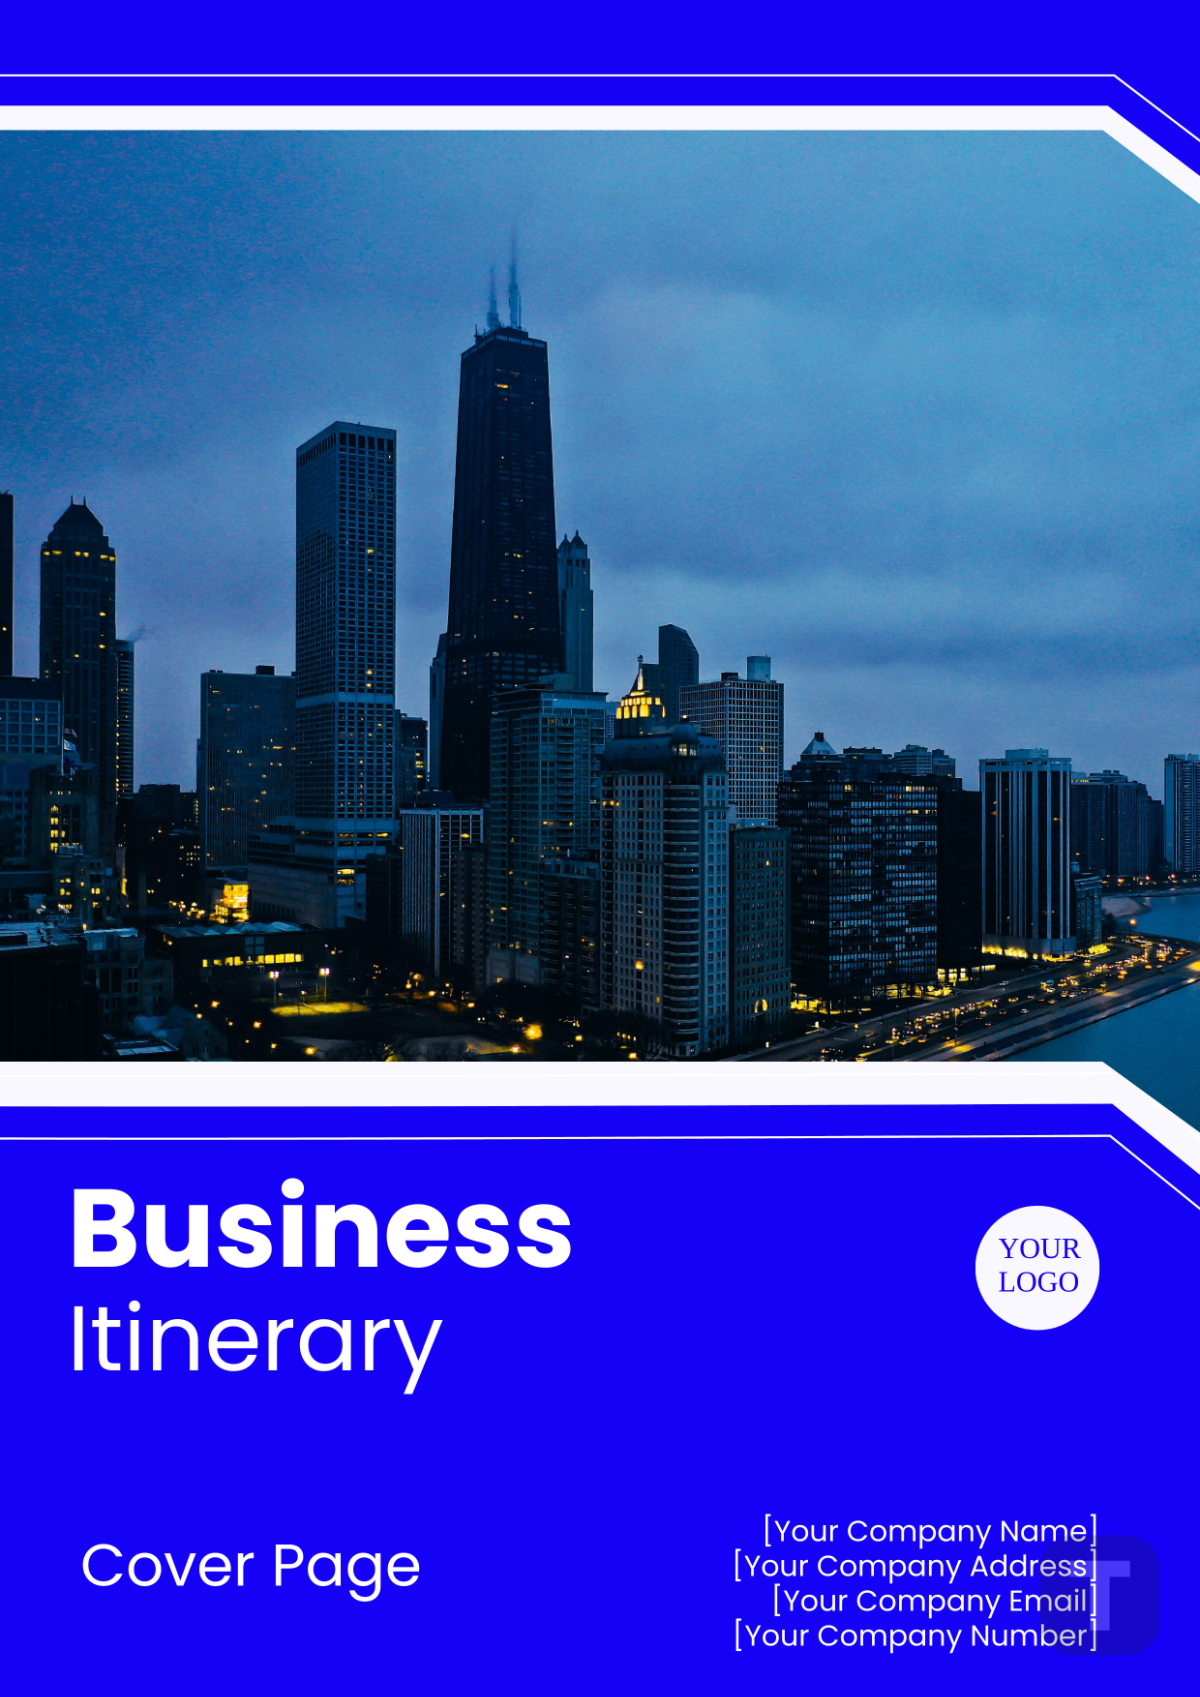 Business Itinerary Cover Page